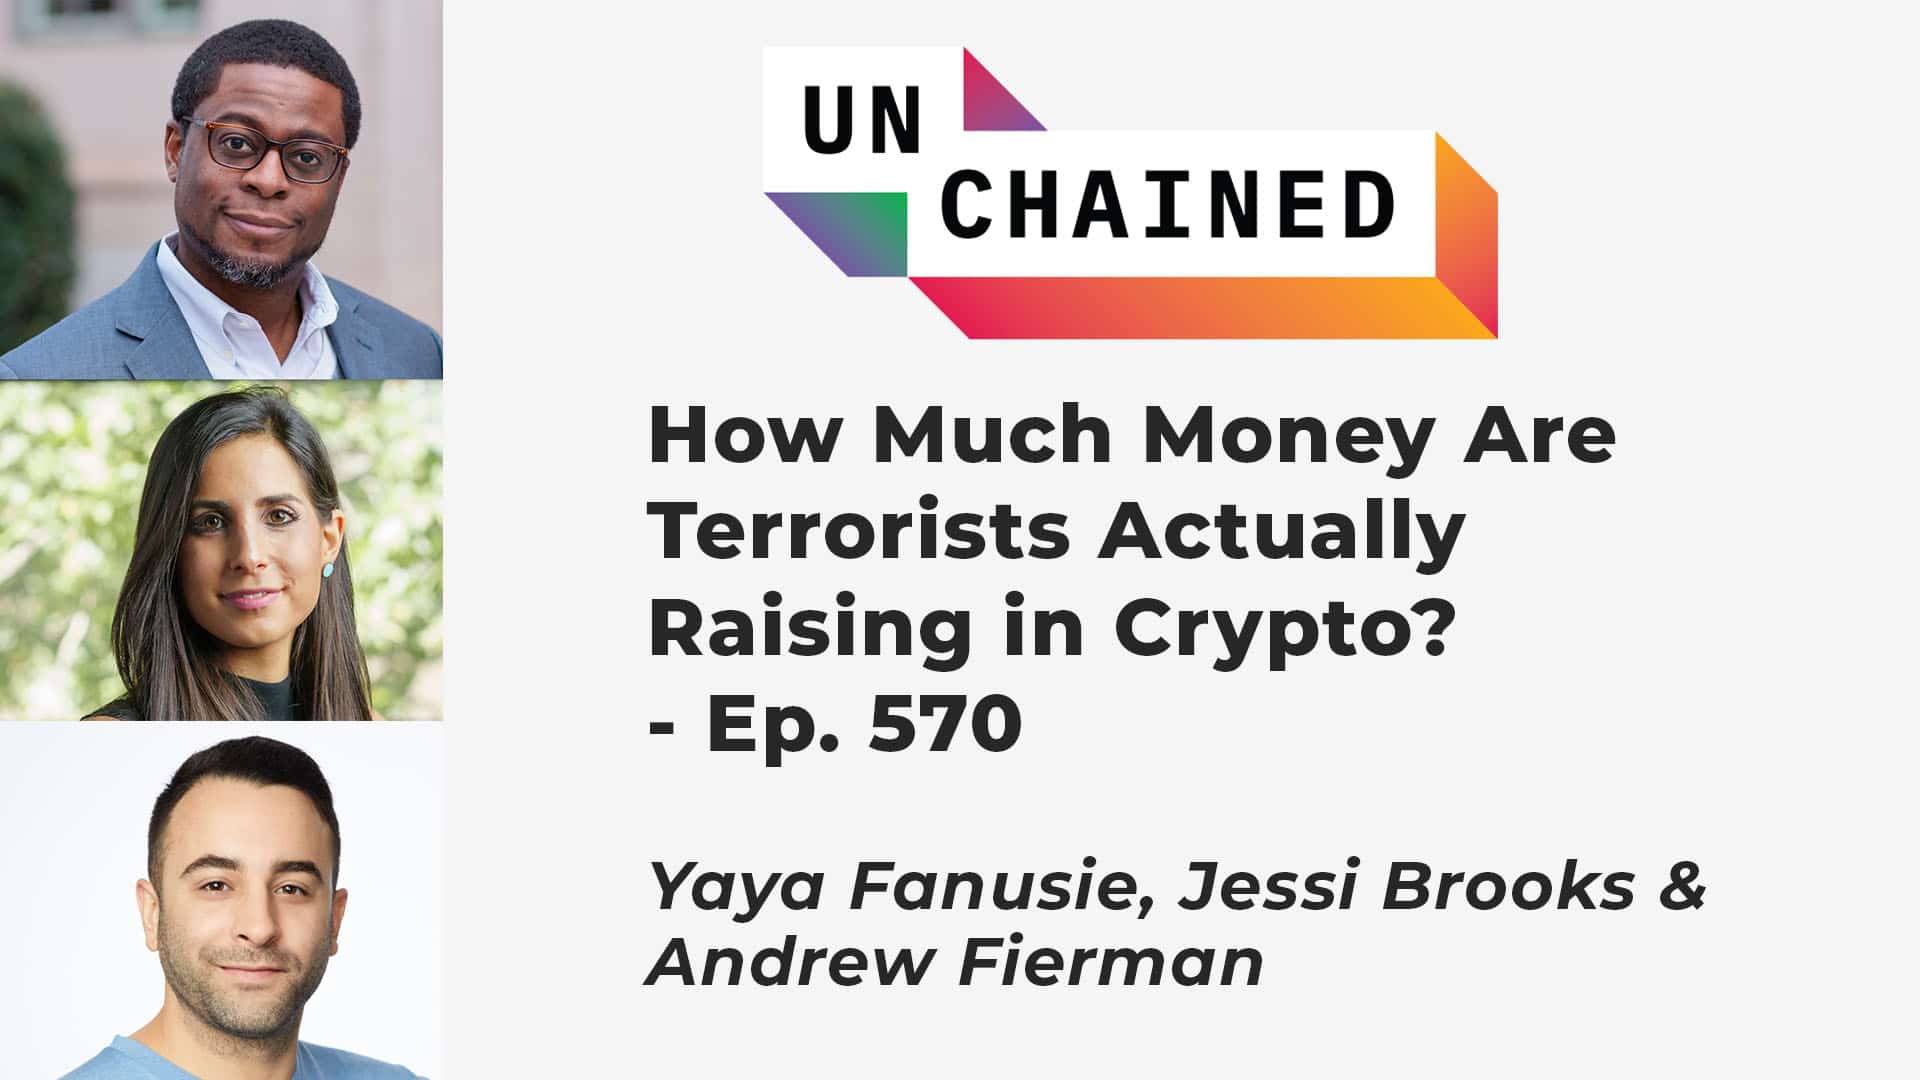 How Much Money Are Terrorists Actually Raising in Crypto? - Ep. 570